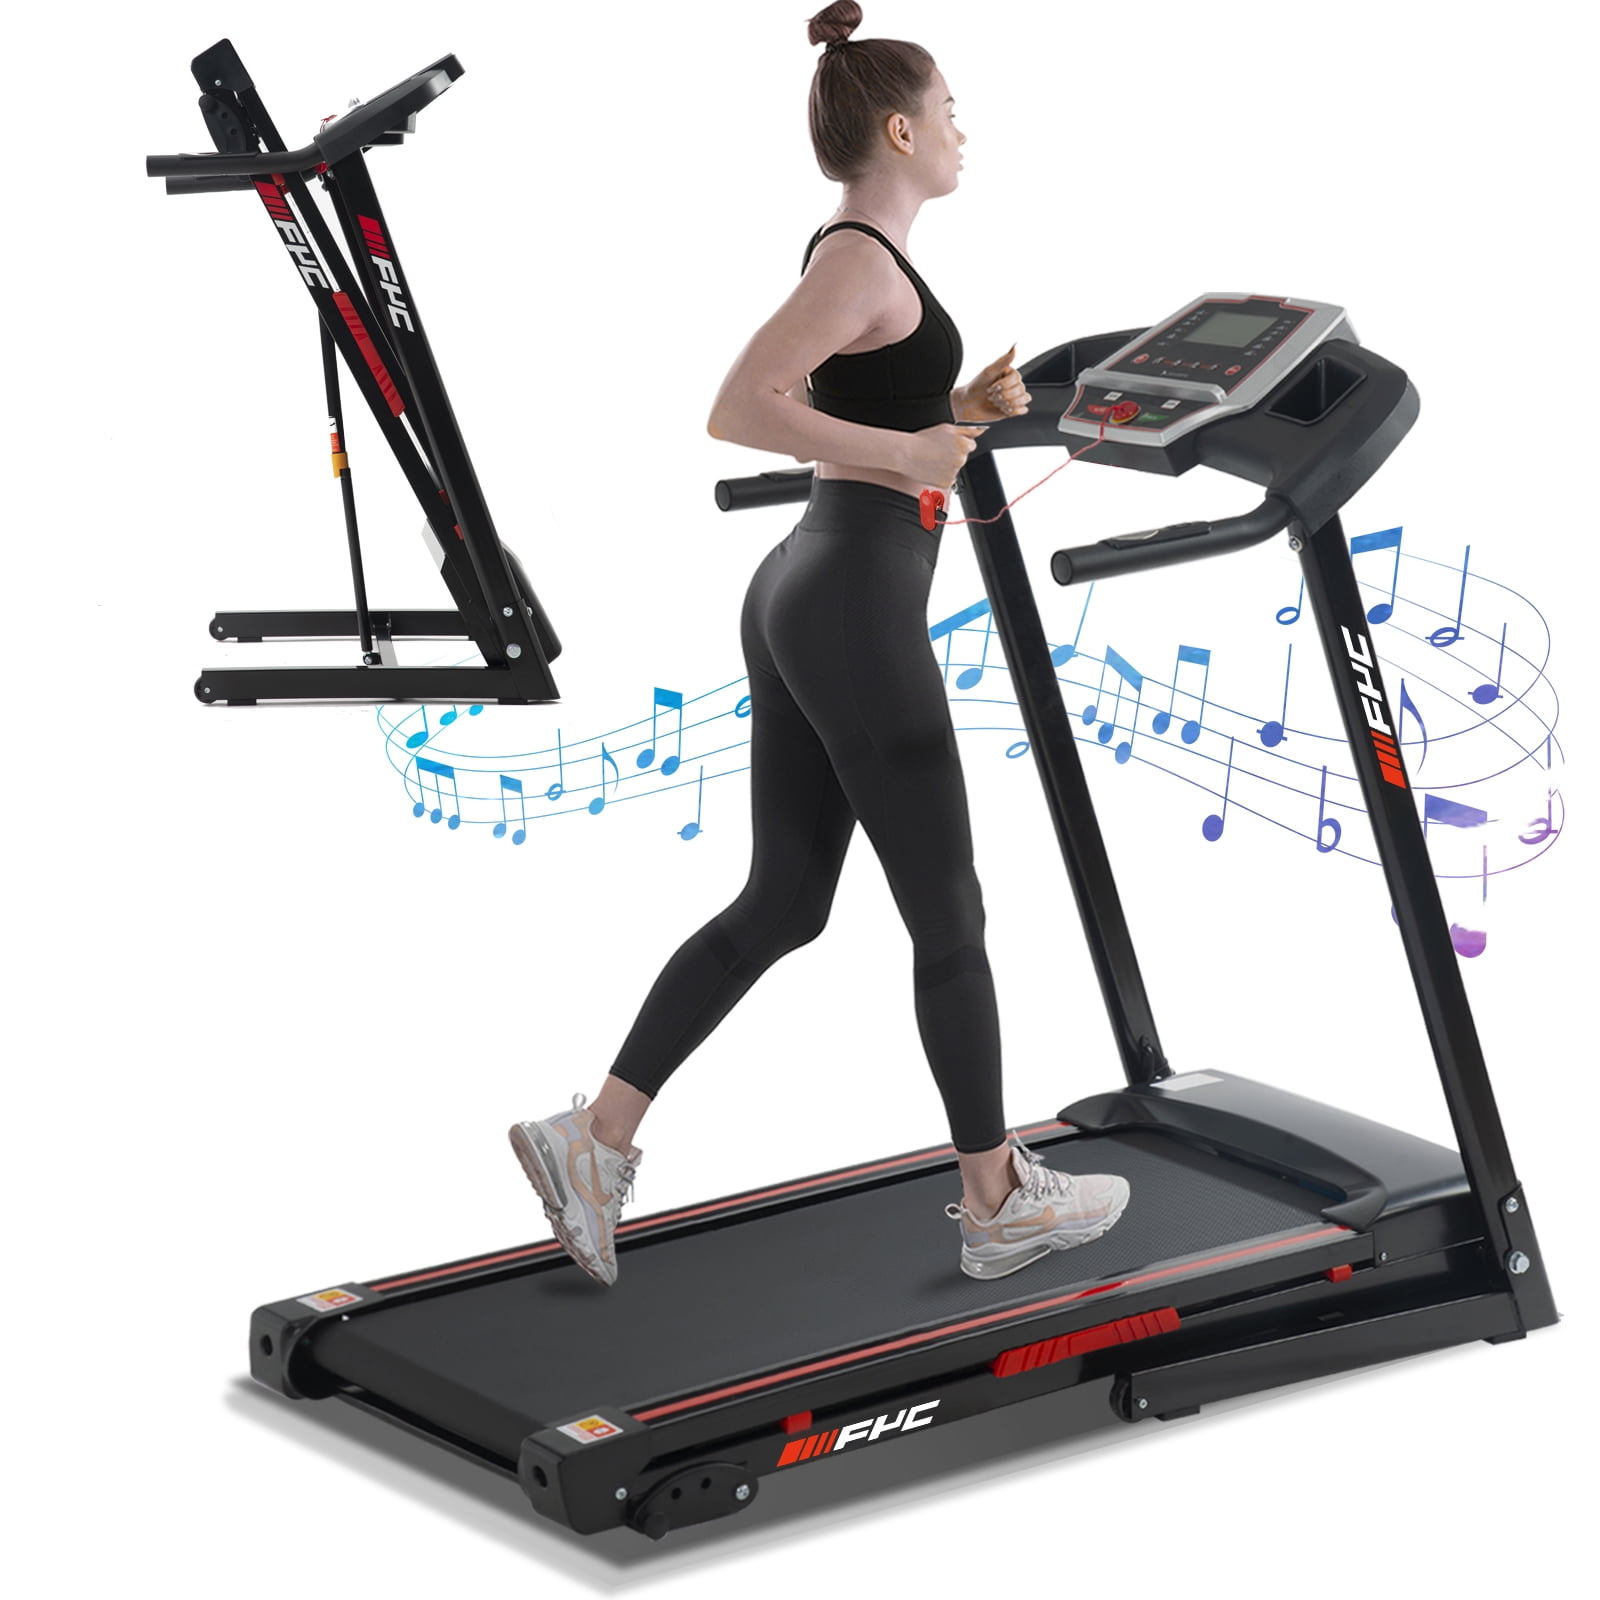 Treadmill Home Multi-function Weight Loss Fitness Folding Small Gym Special 